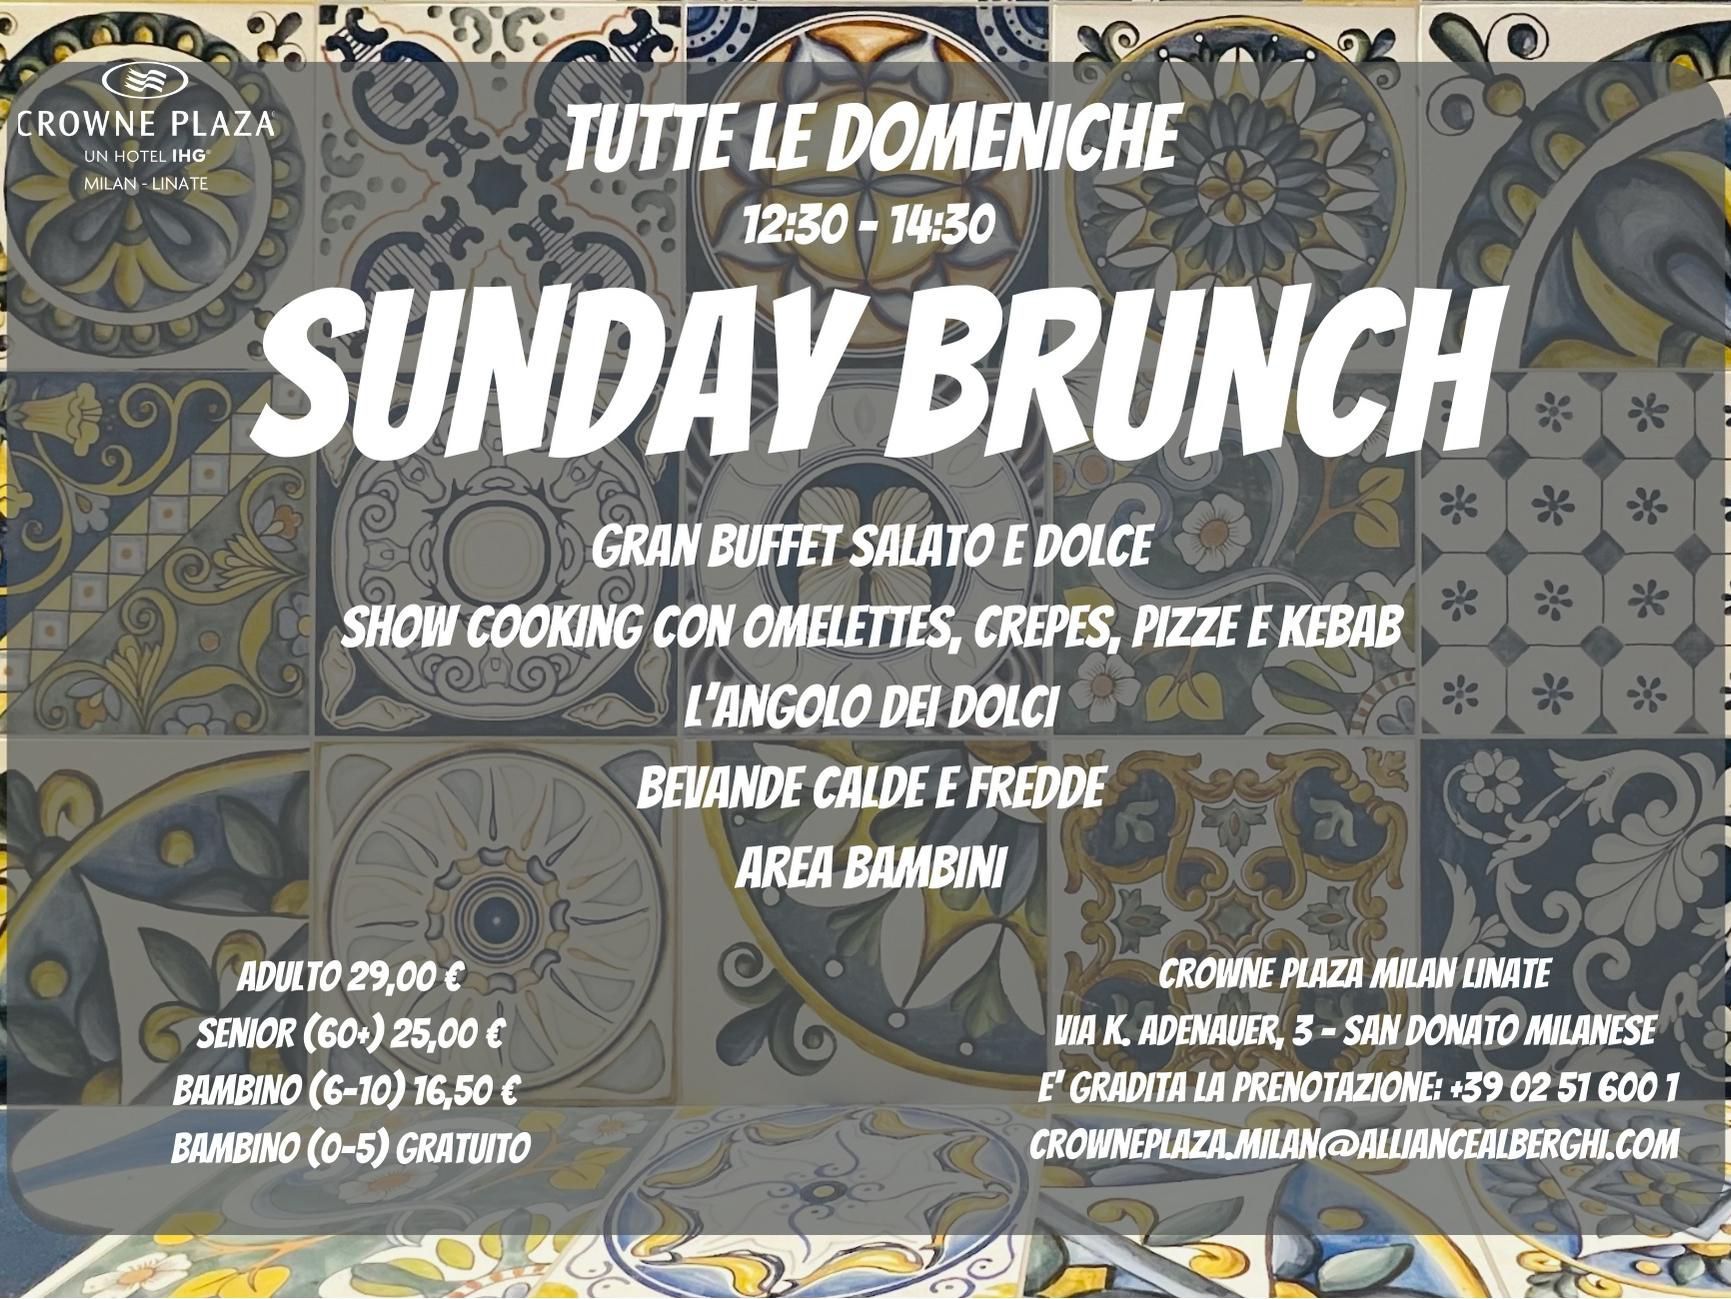 Sunday Brunch every week from 12:30 to 14:30, with a delicious choice of Italian and international dishes. Kids corner available.